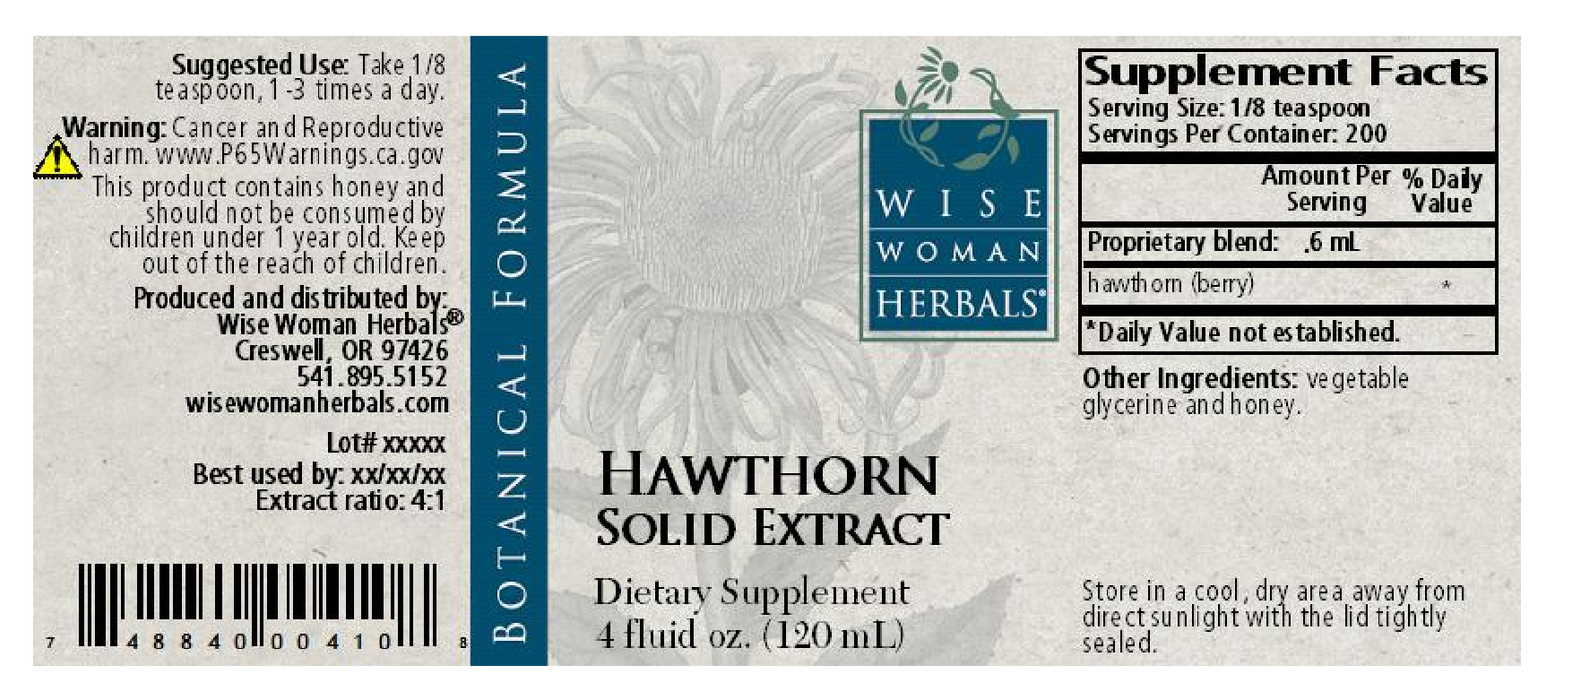 Wise Woman Herbals Hawthorne Solid Extract